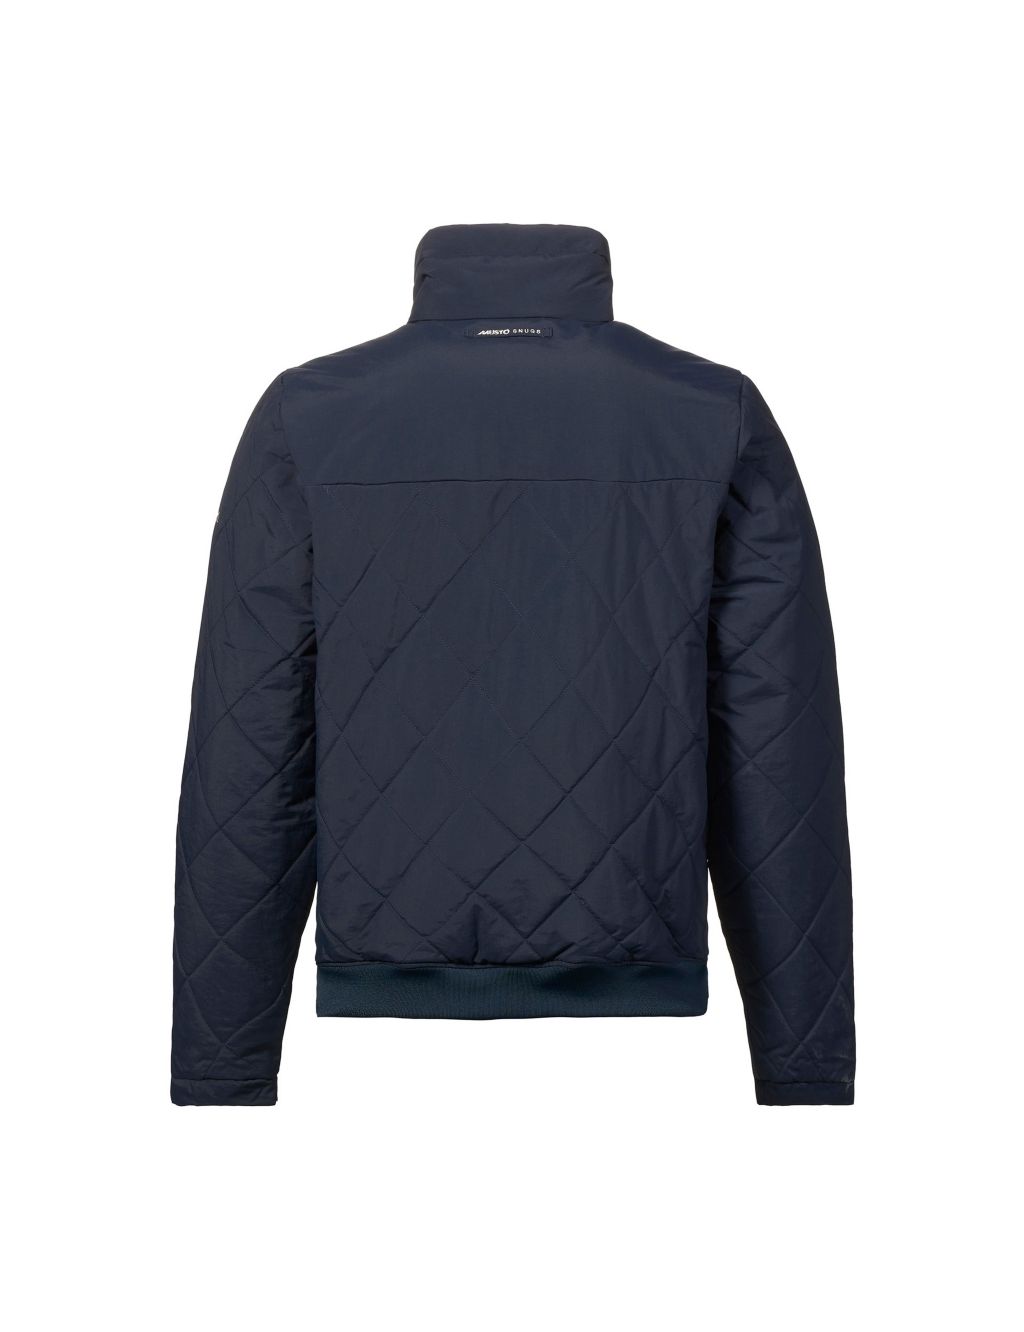 Waterproof Padded Quilted Bomber Jacket image 2